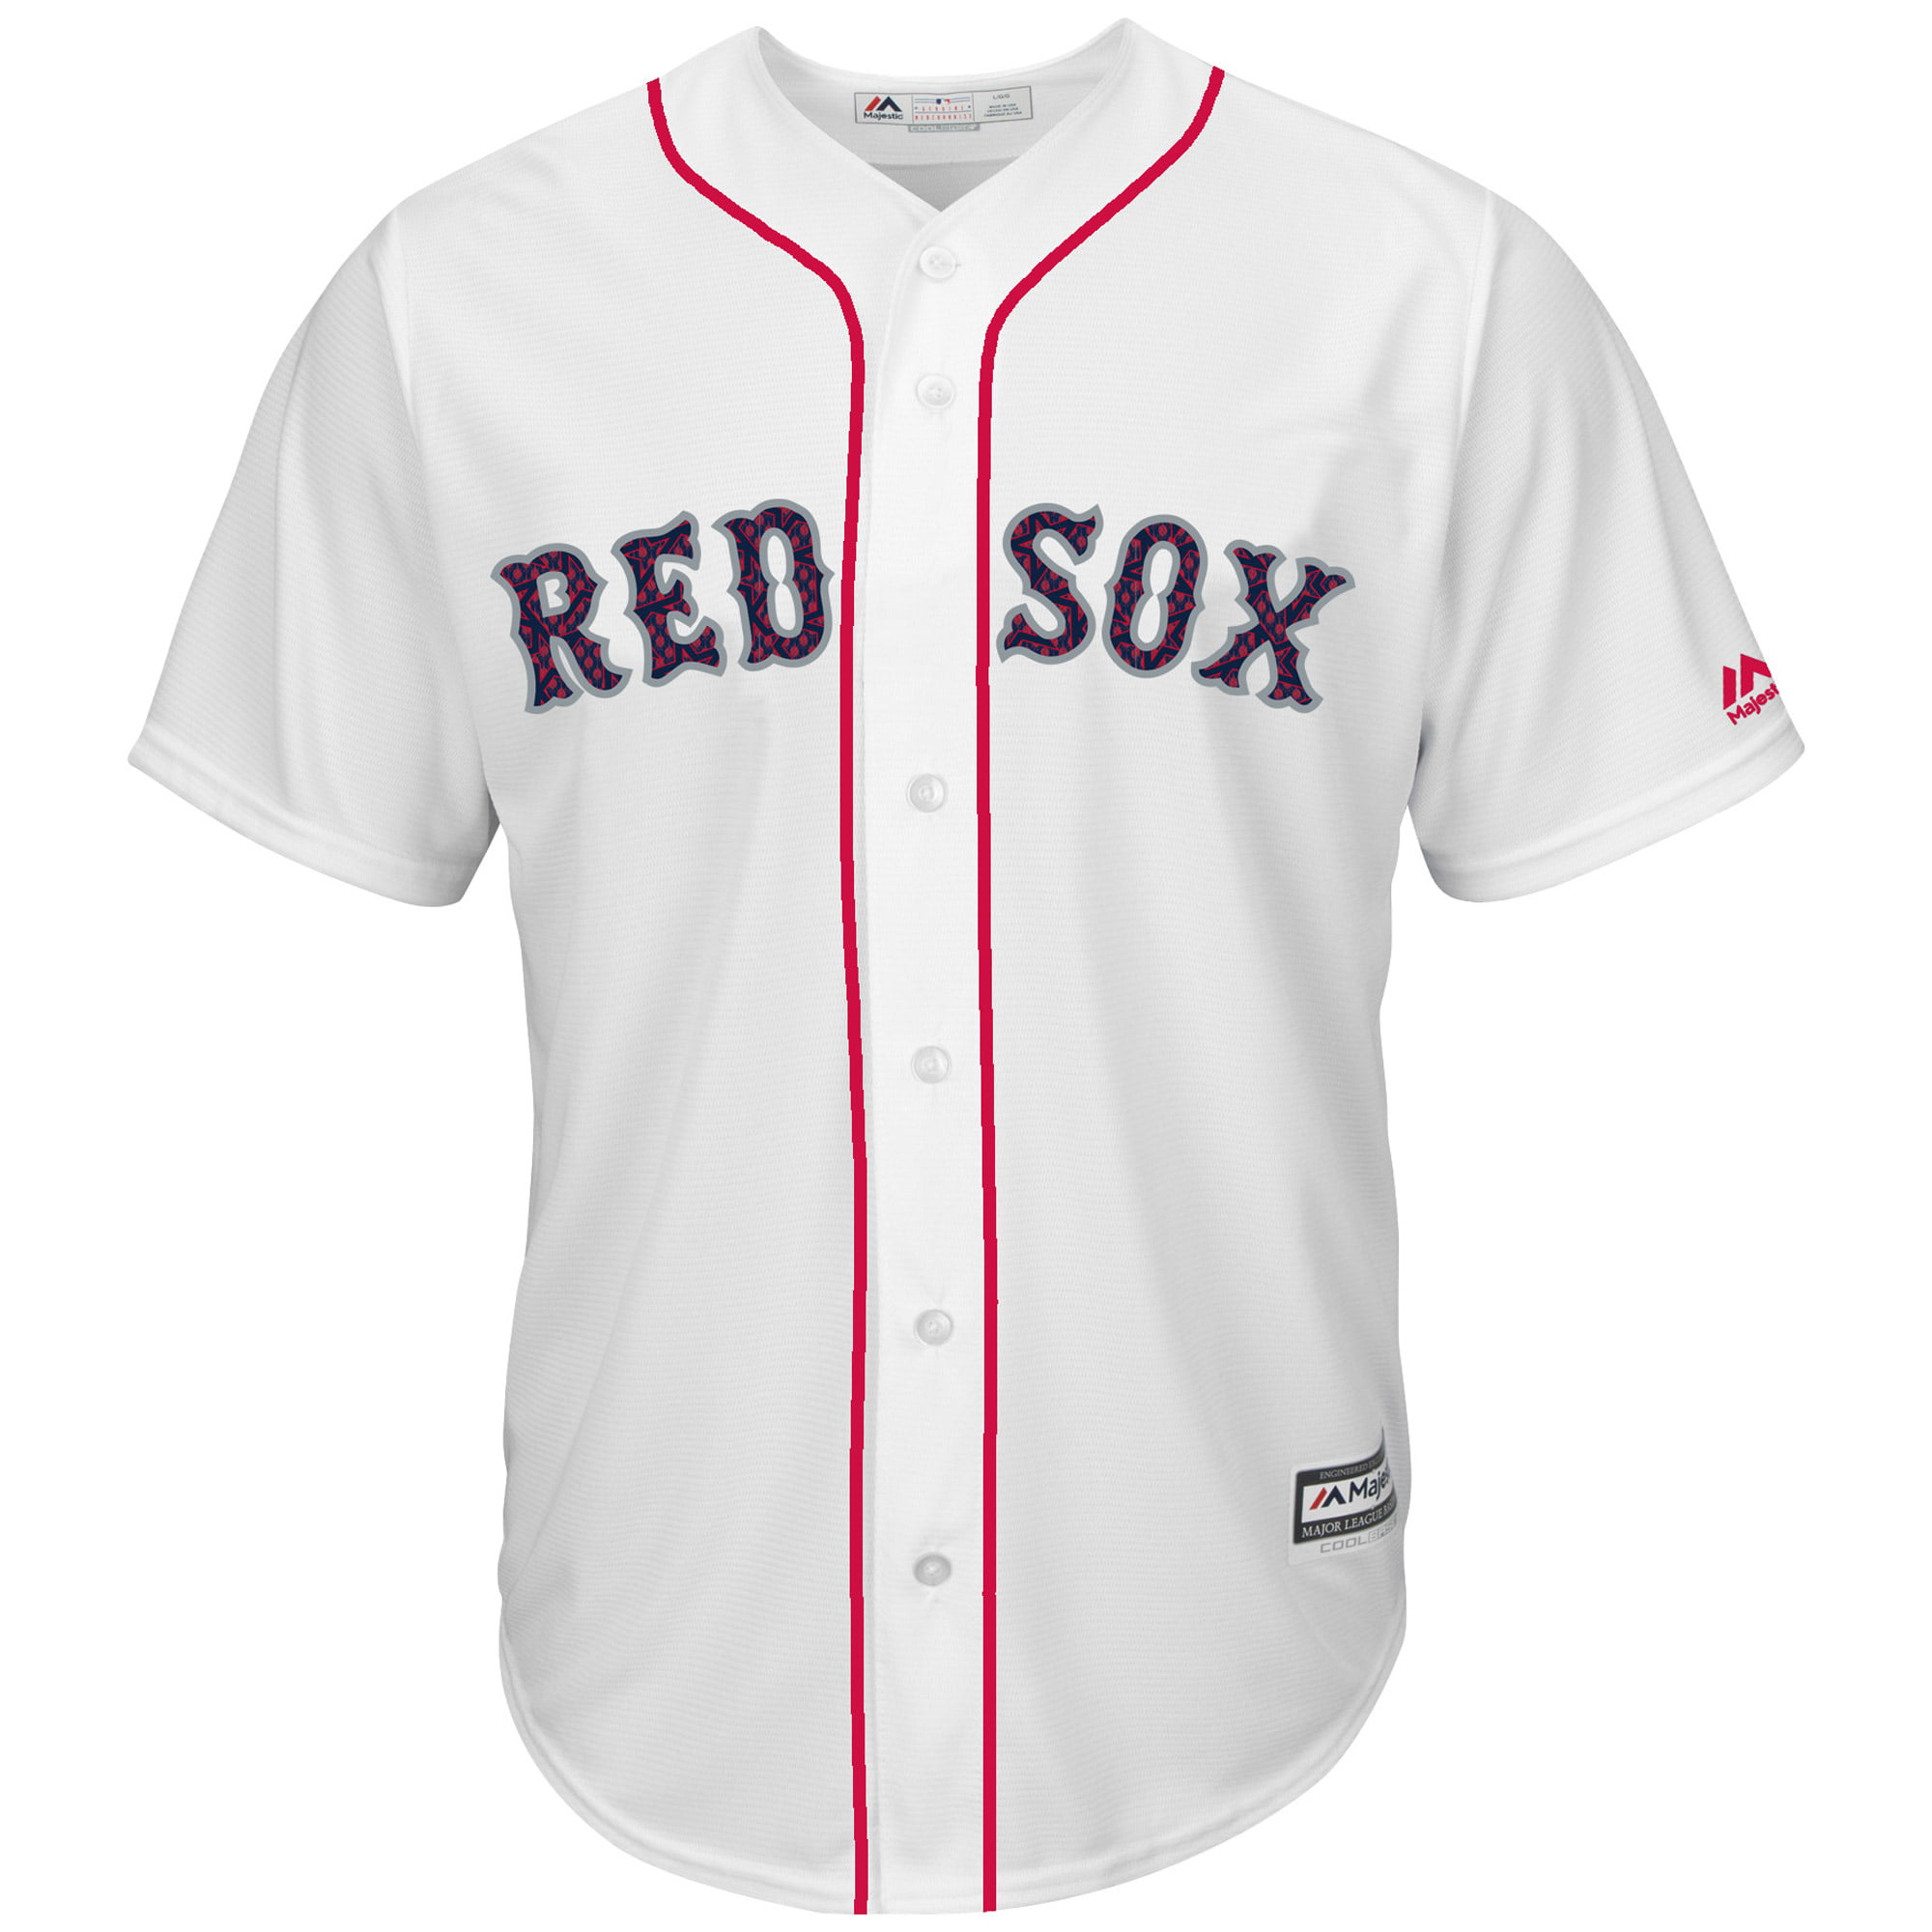 red sox stars and stripes jersey